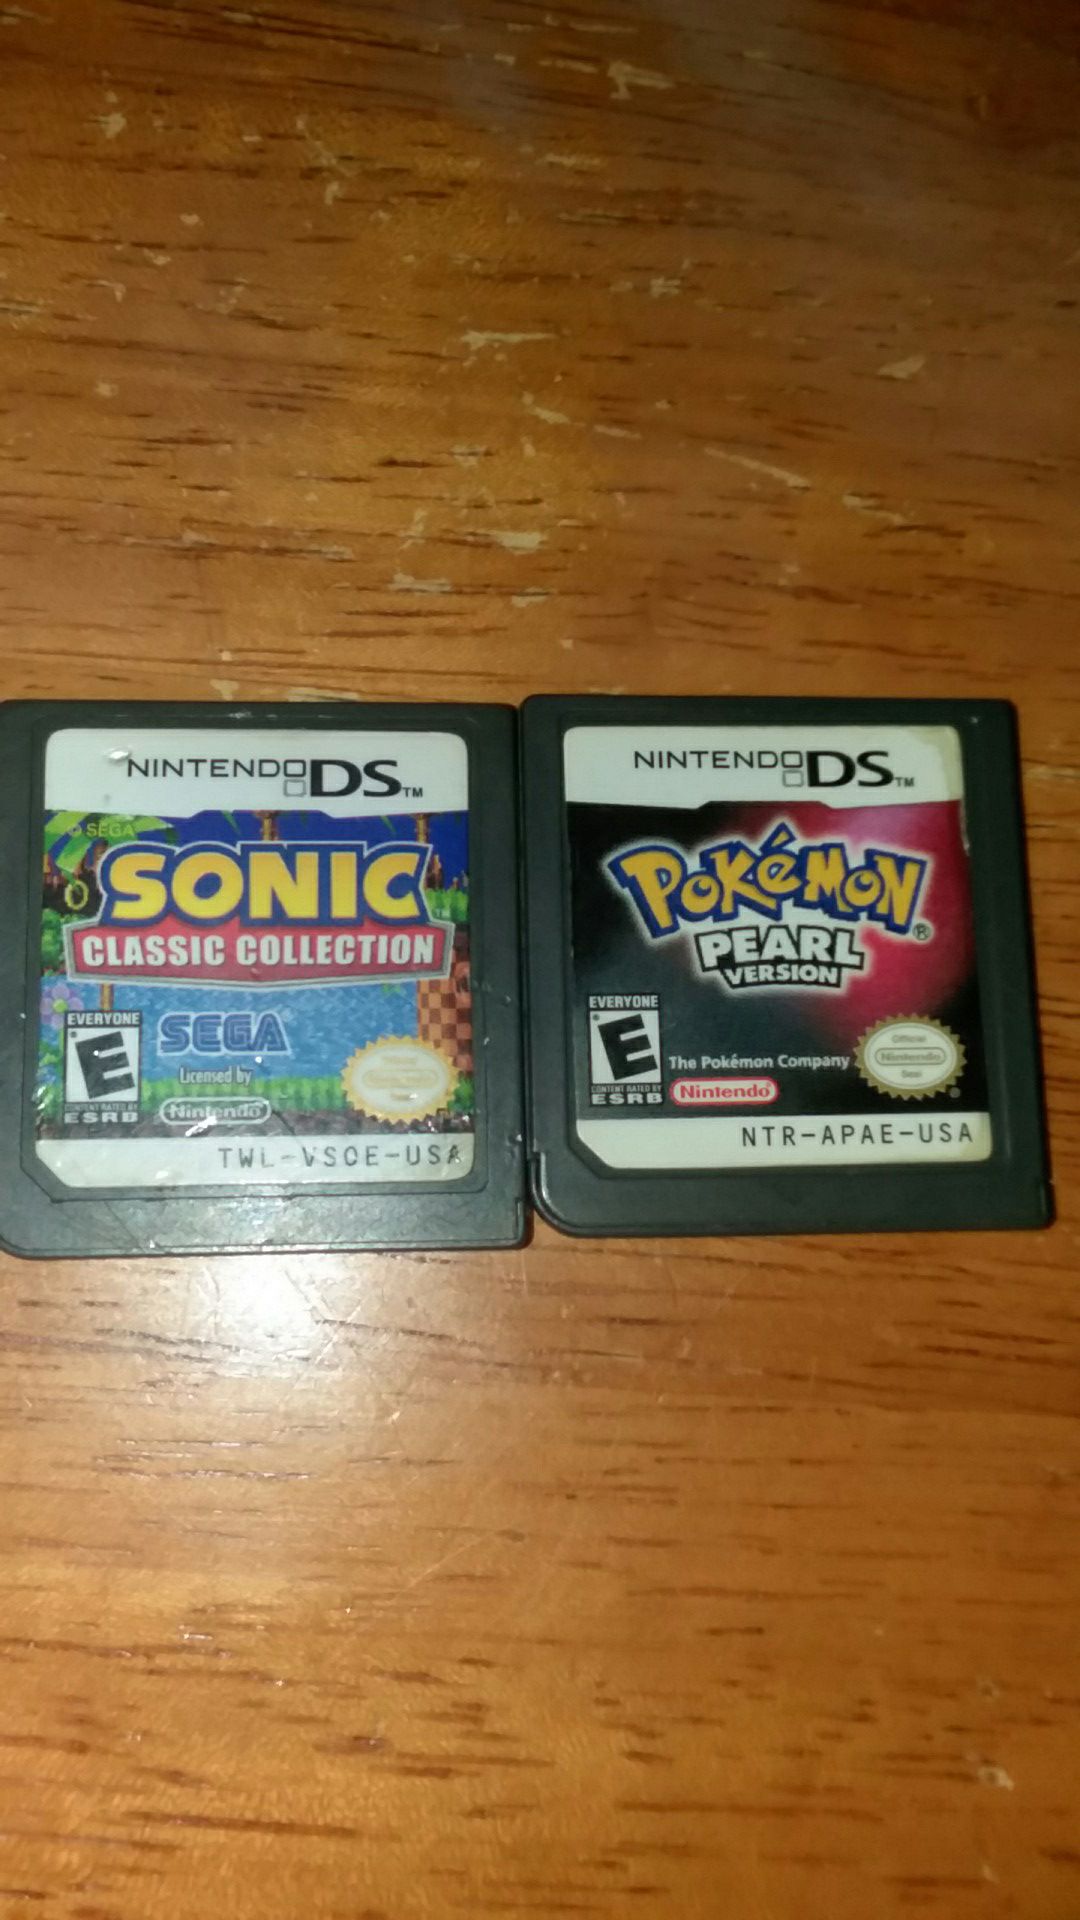 Pokemon pearl and sonic classic collection